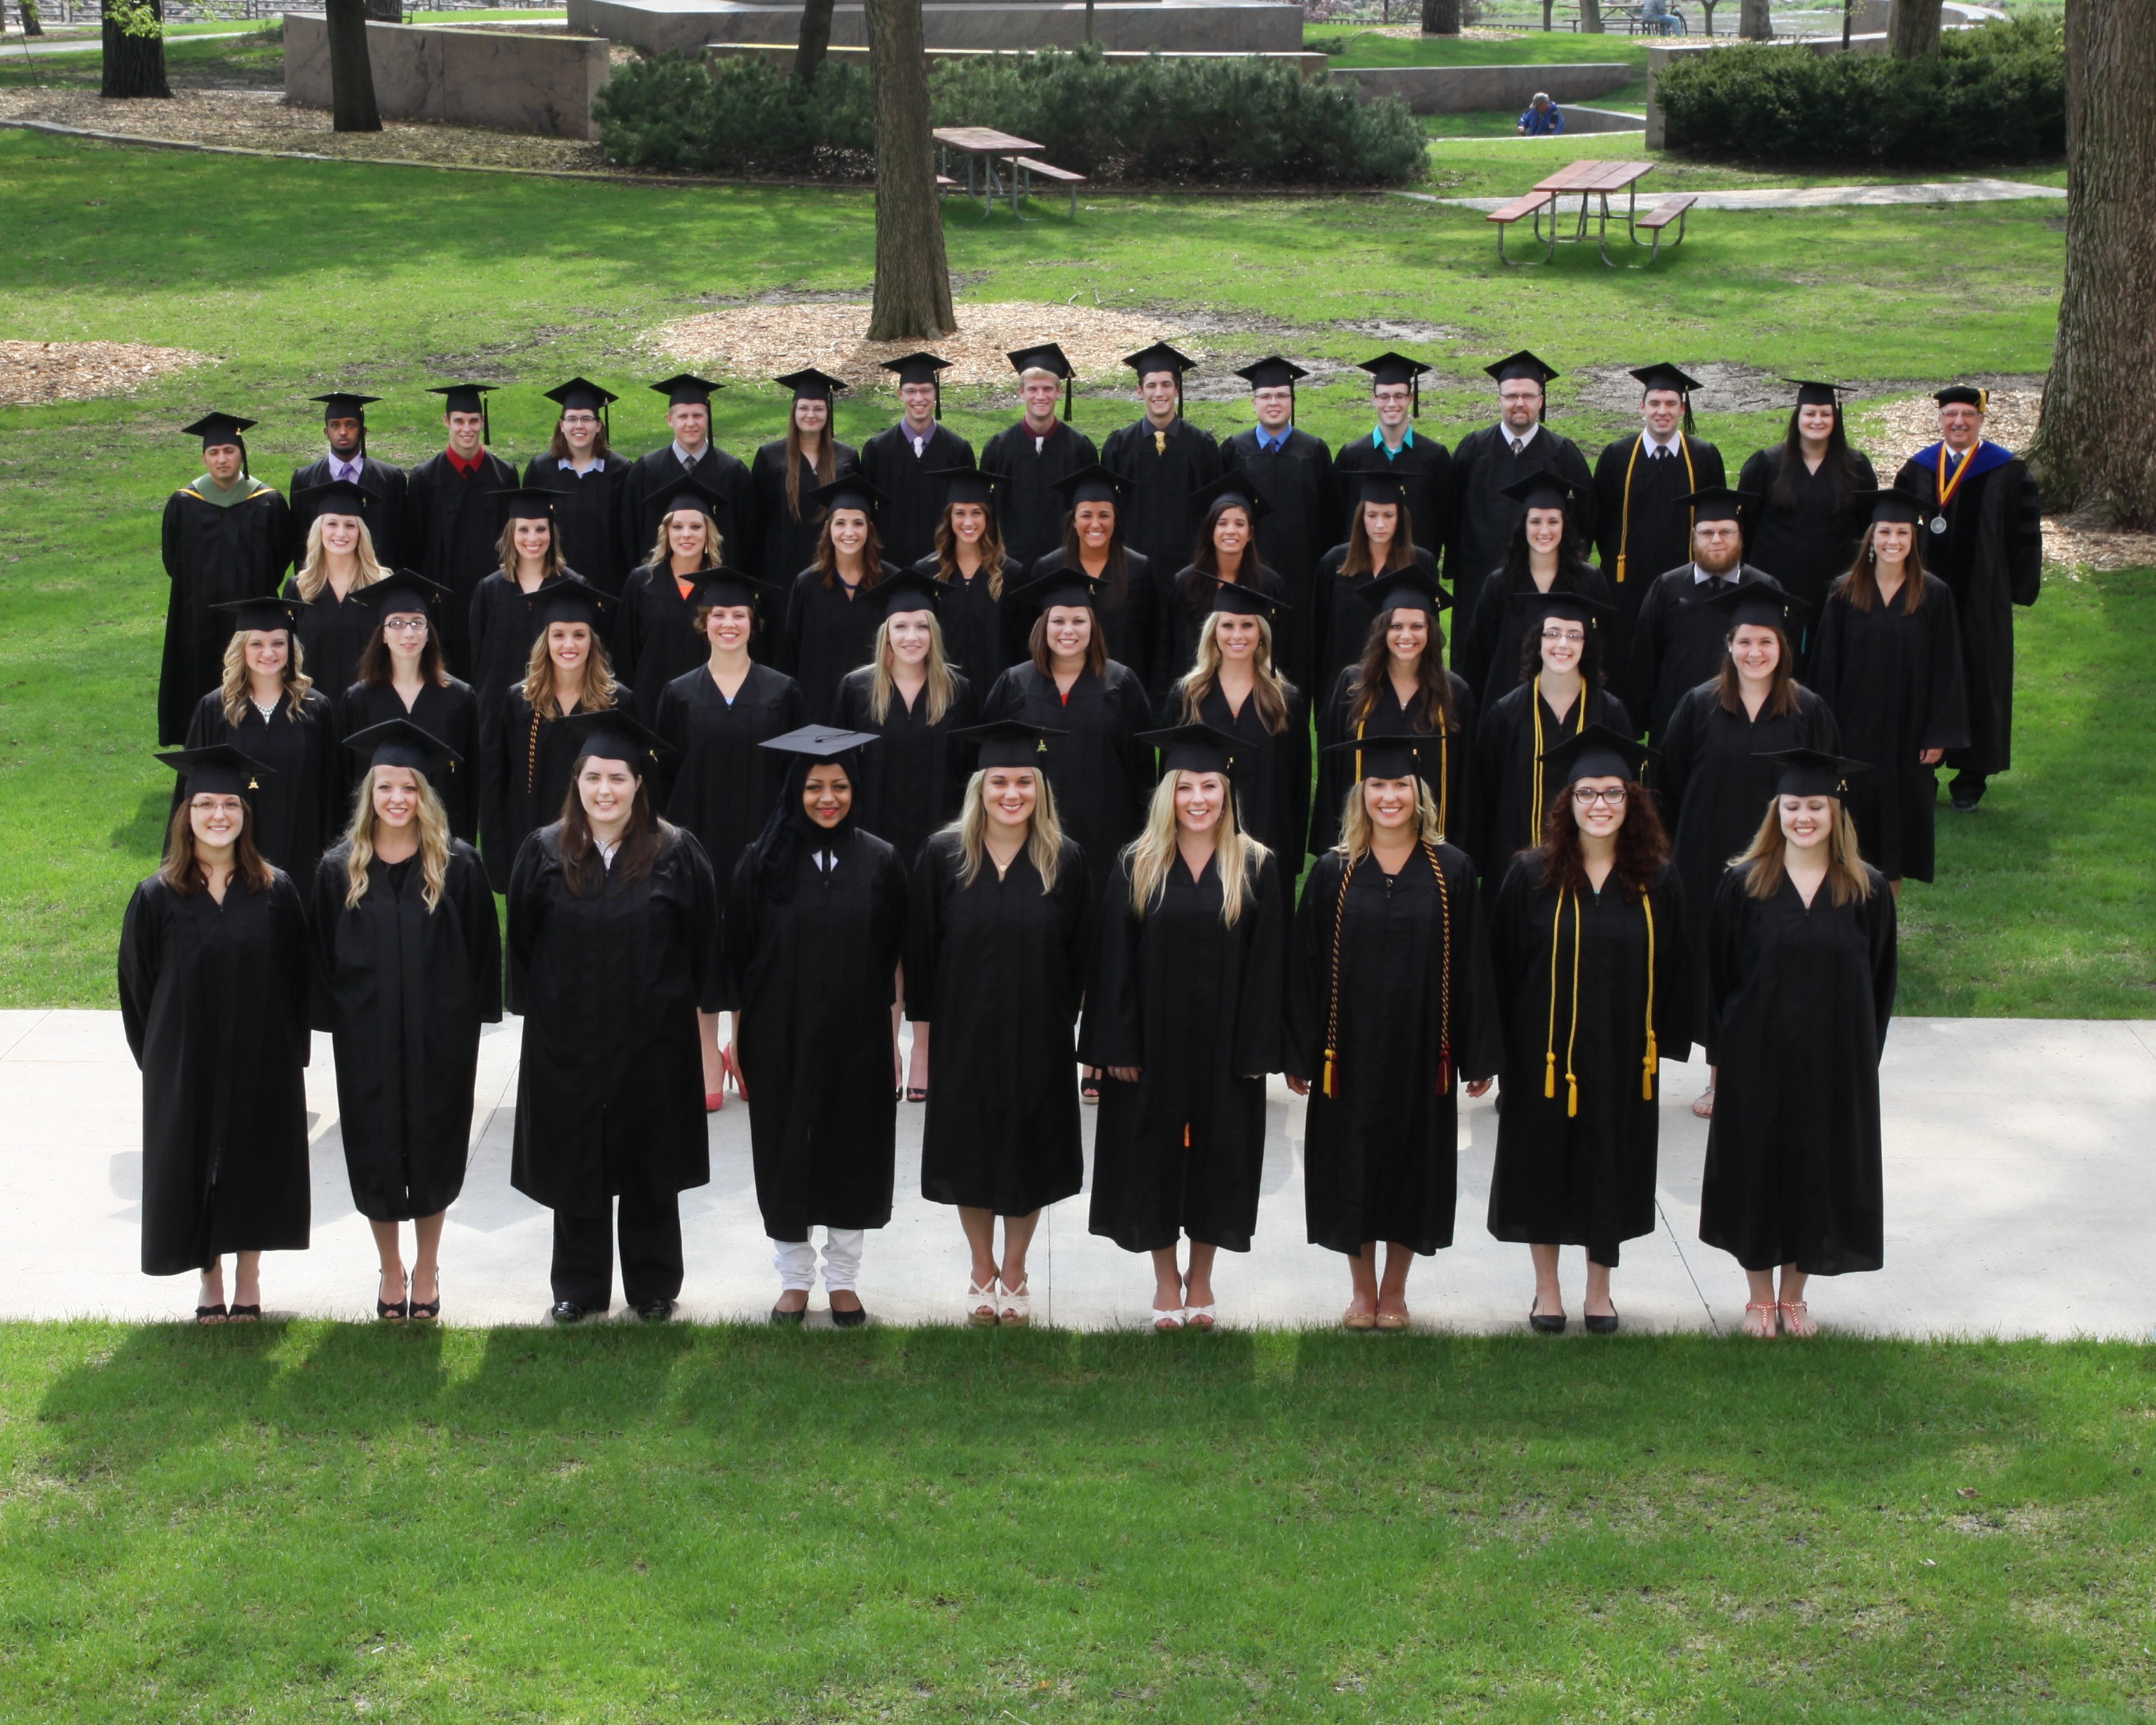 Photo of UMR students in cap and gown.